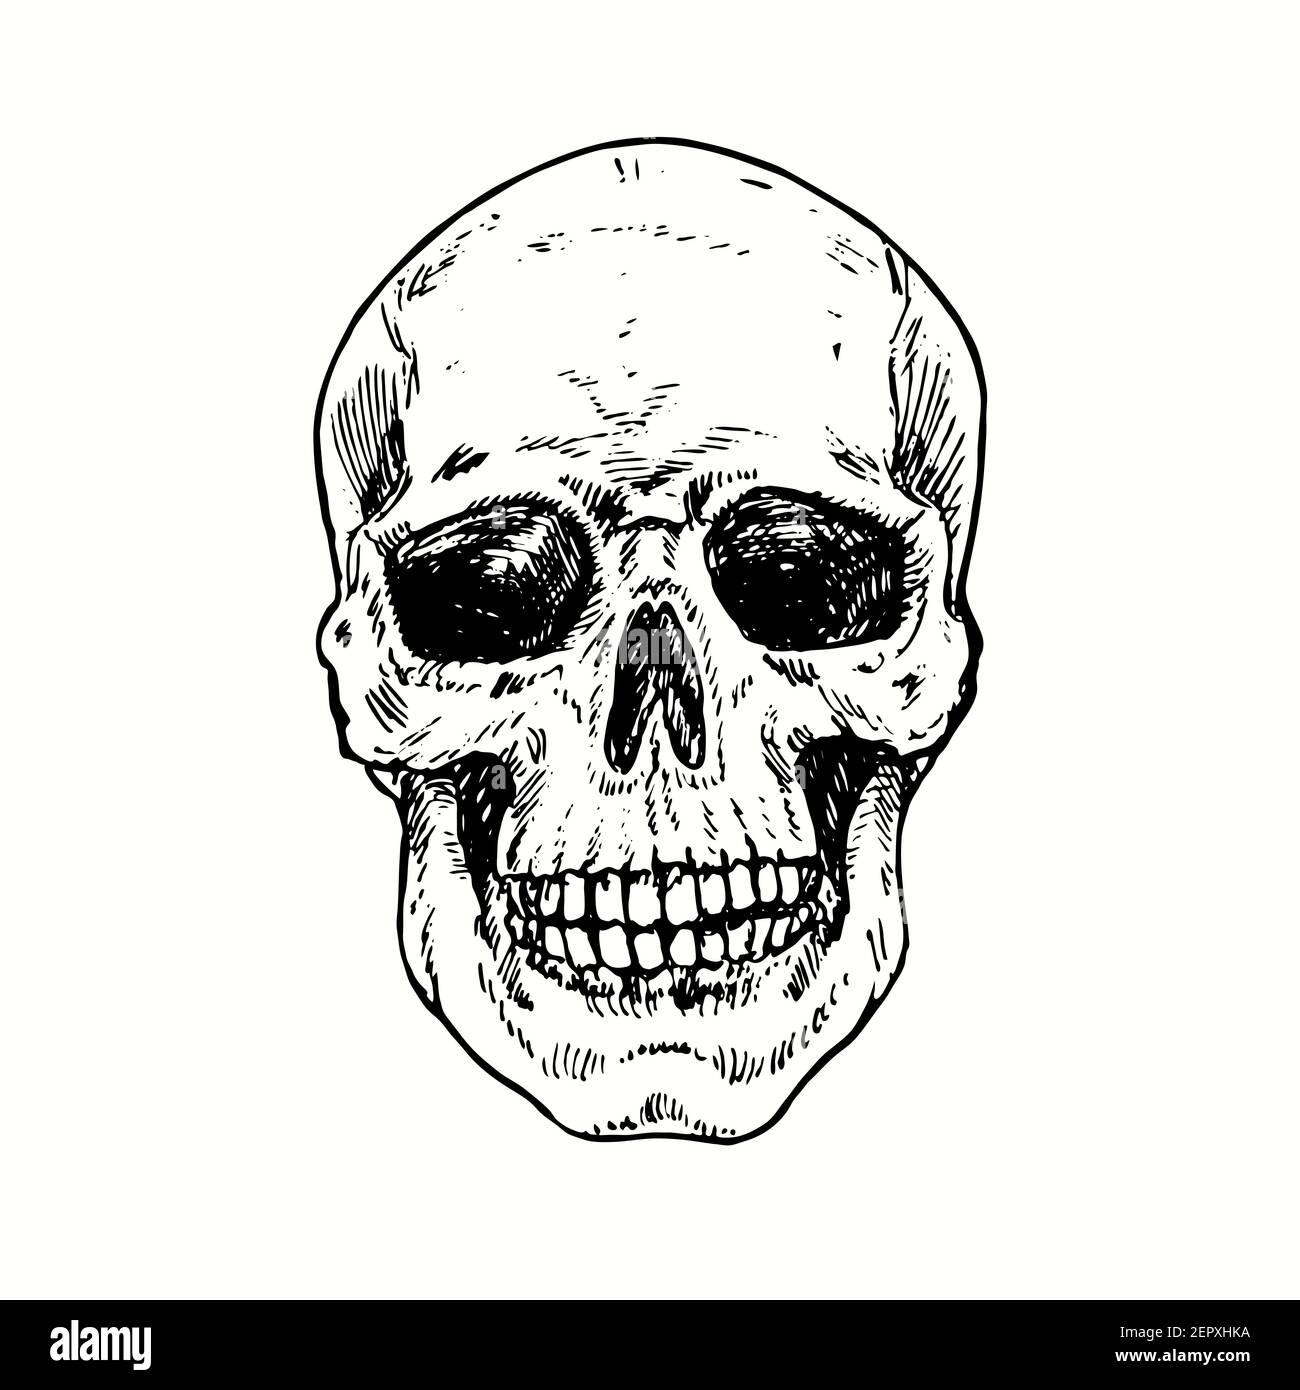 Skull face, front view. Ink black and white drawing. Stock Photo